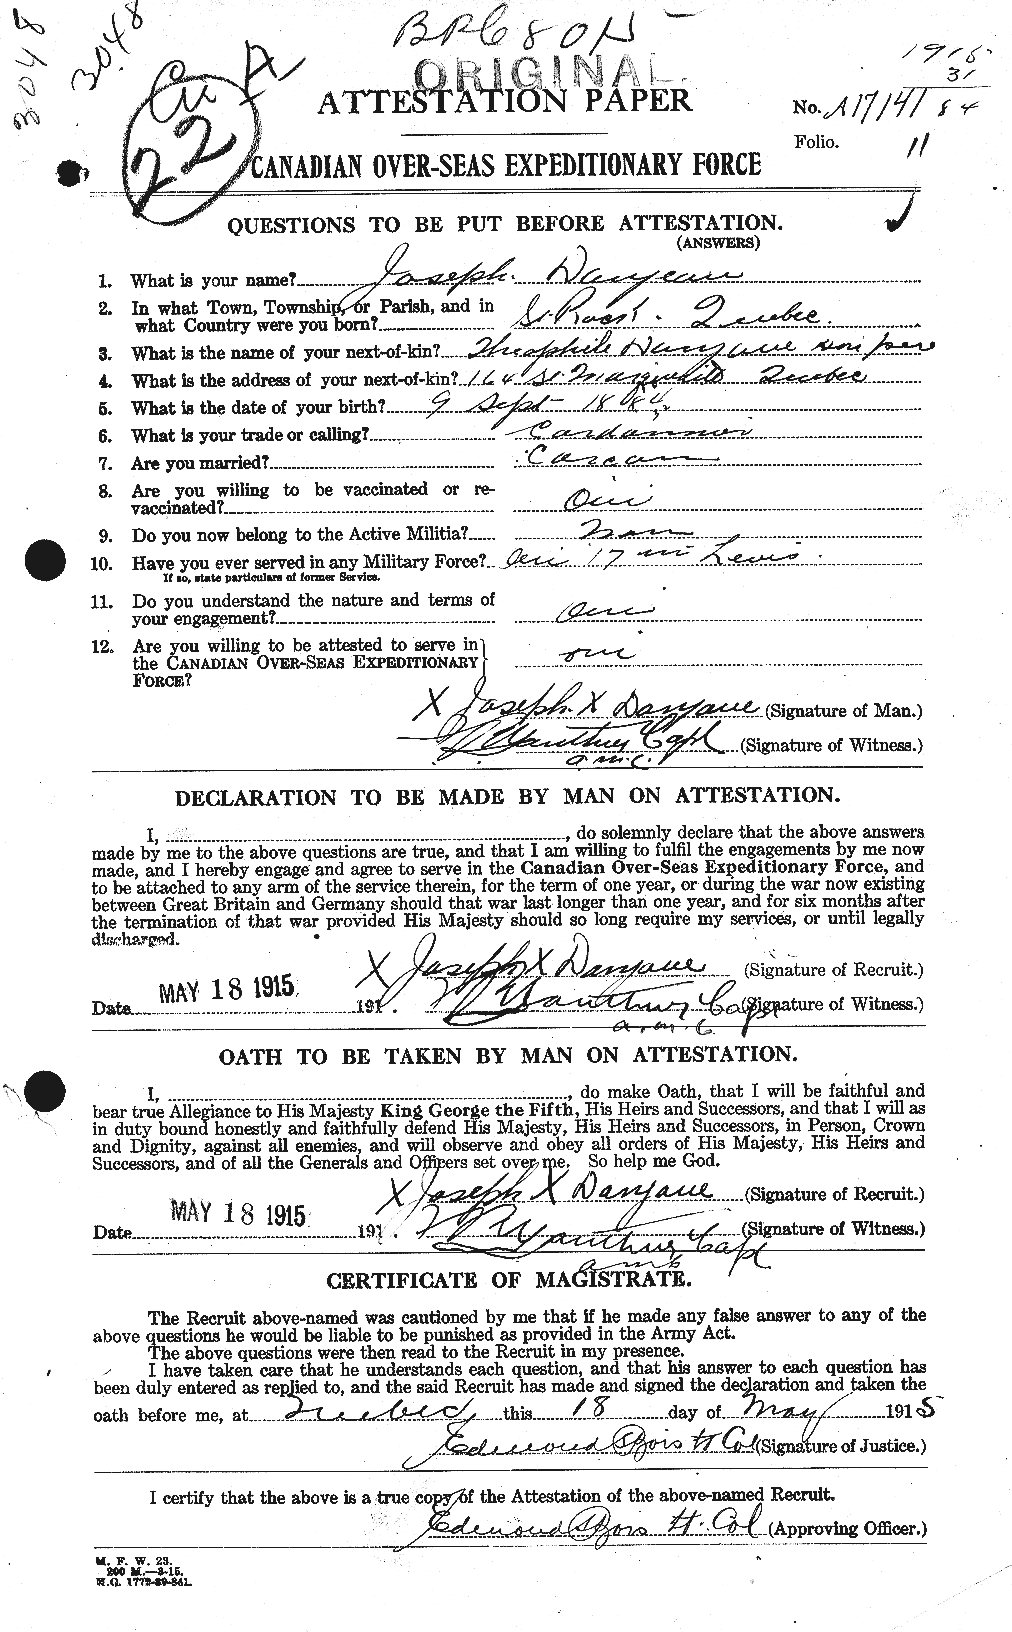 Personnel Records of the First World War - CEF 279764a